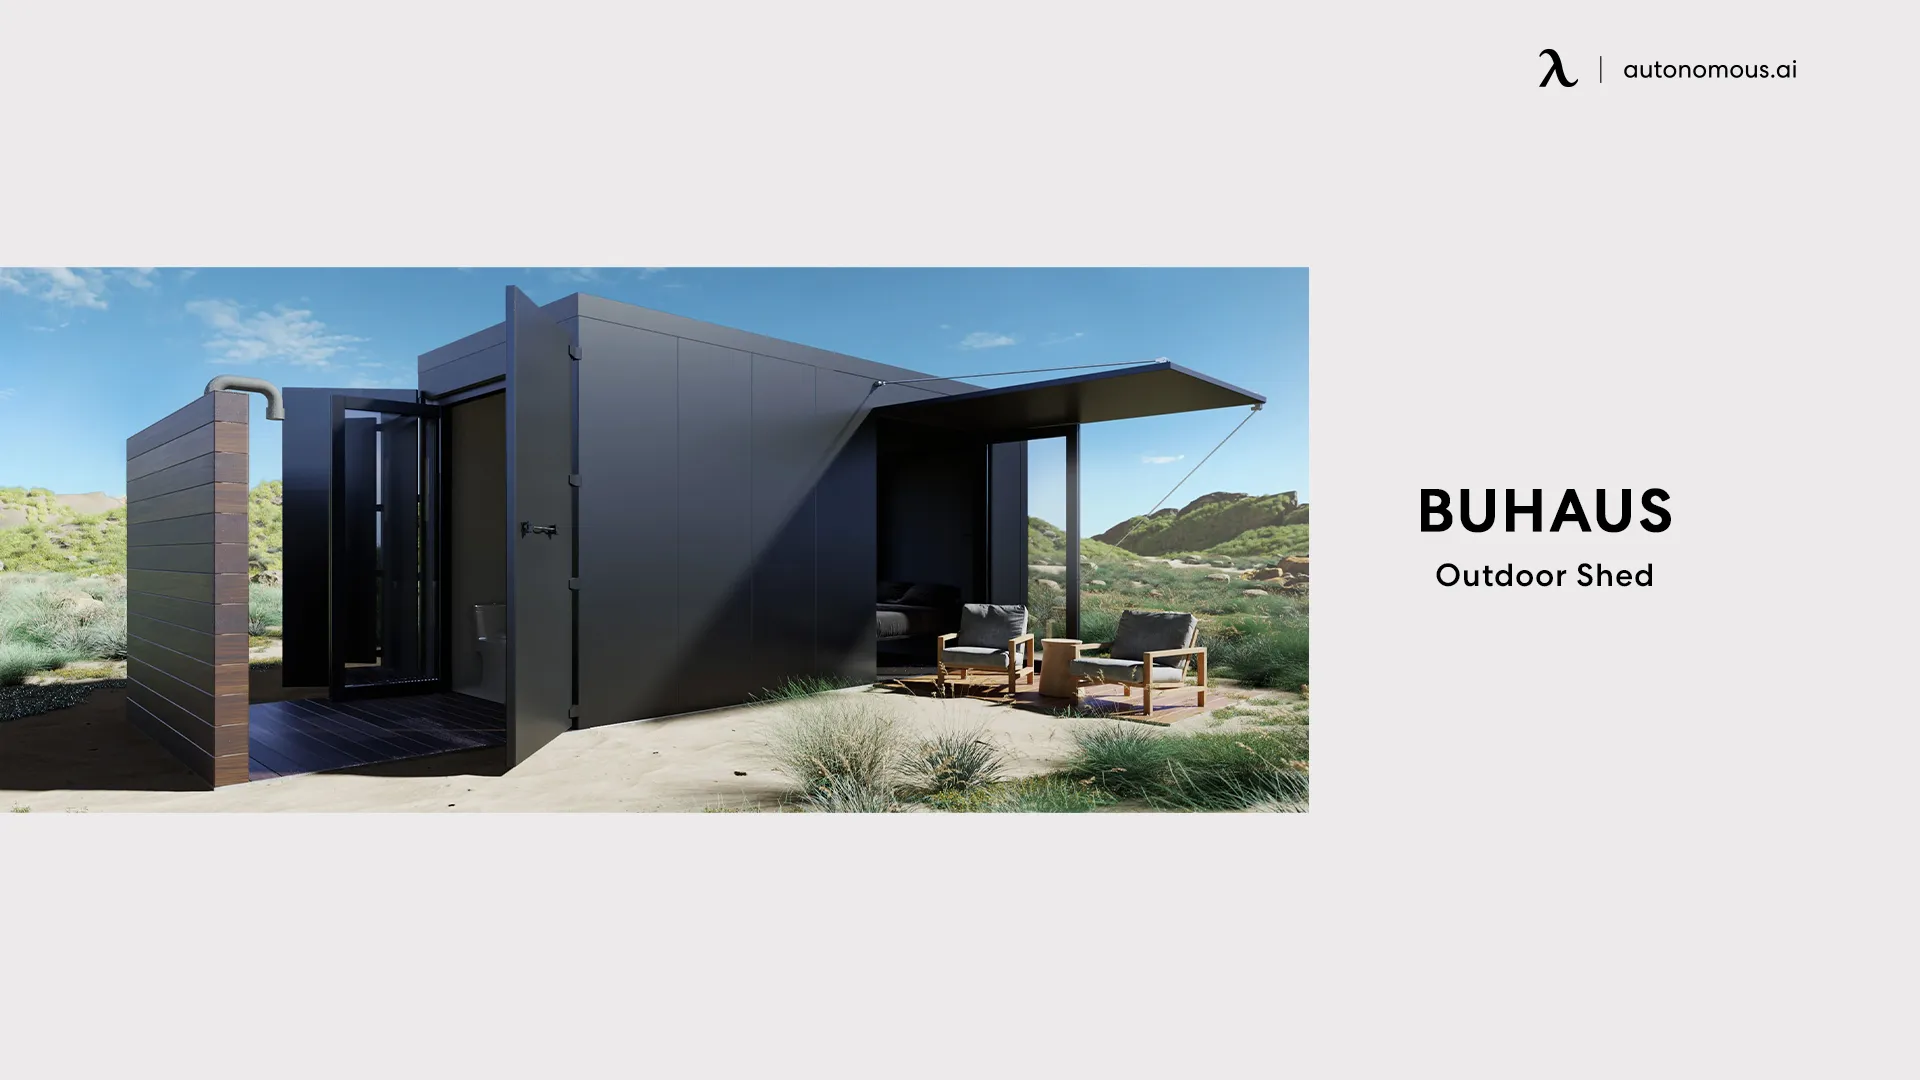 Buhaus Outdoor Shed